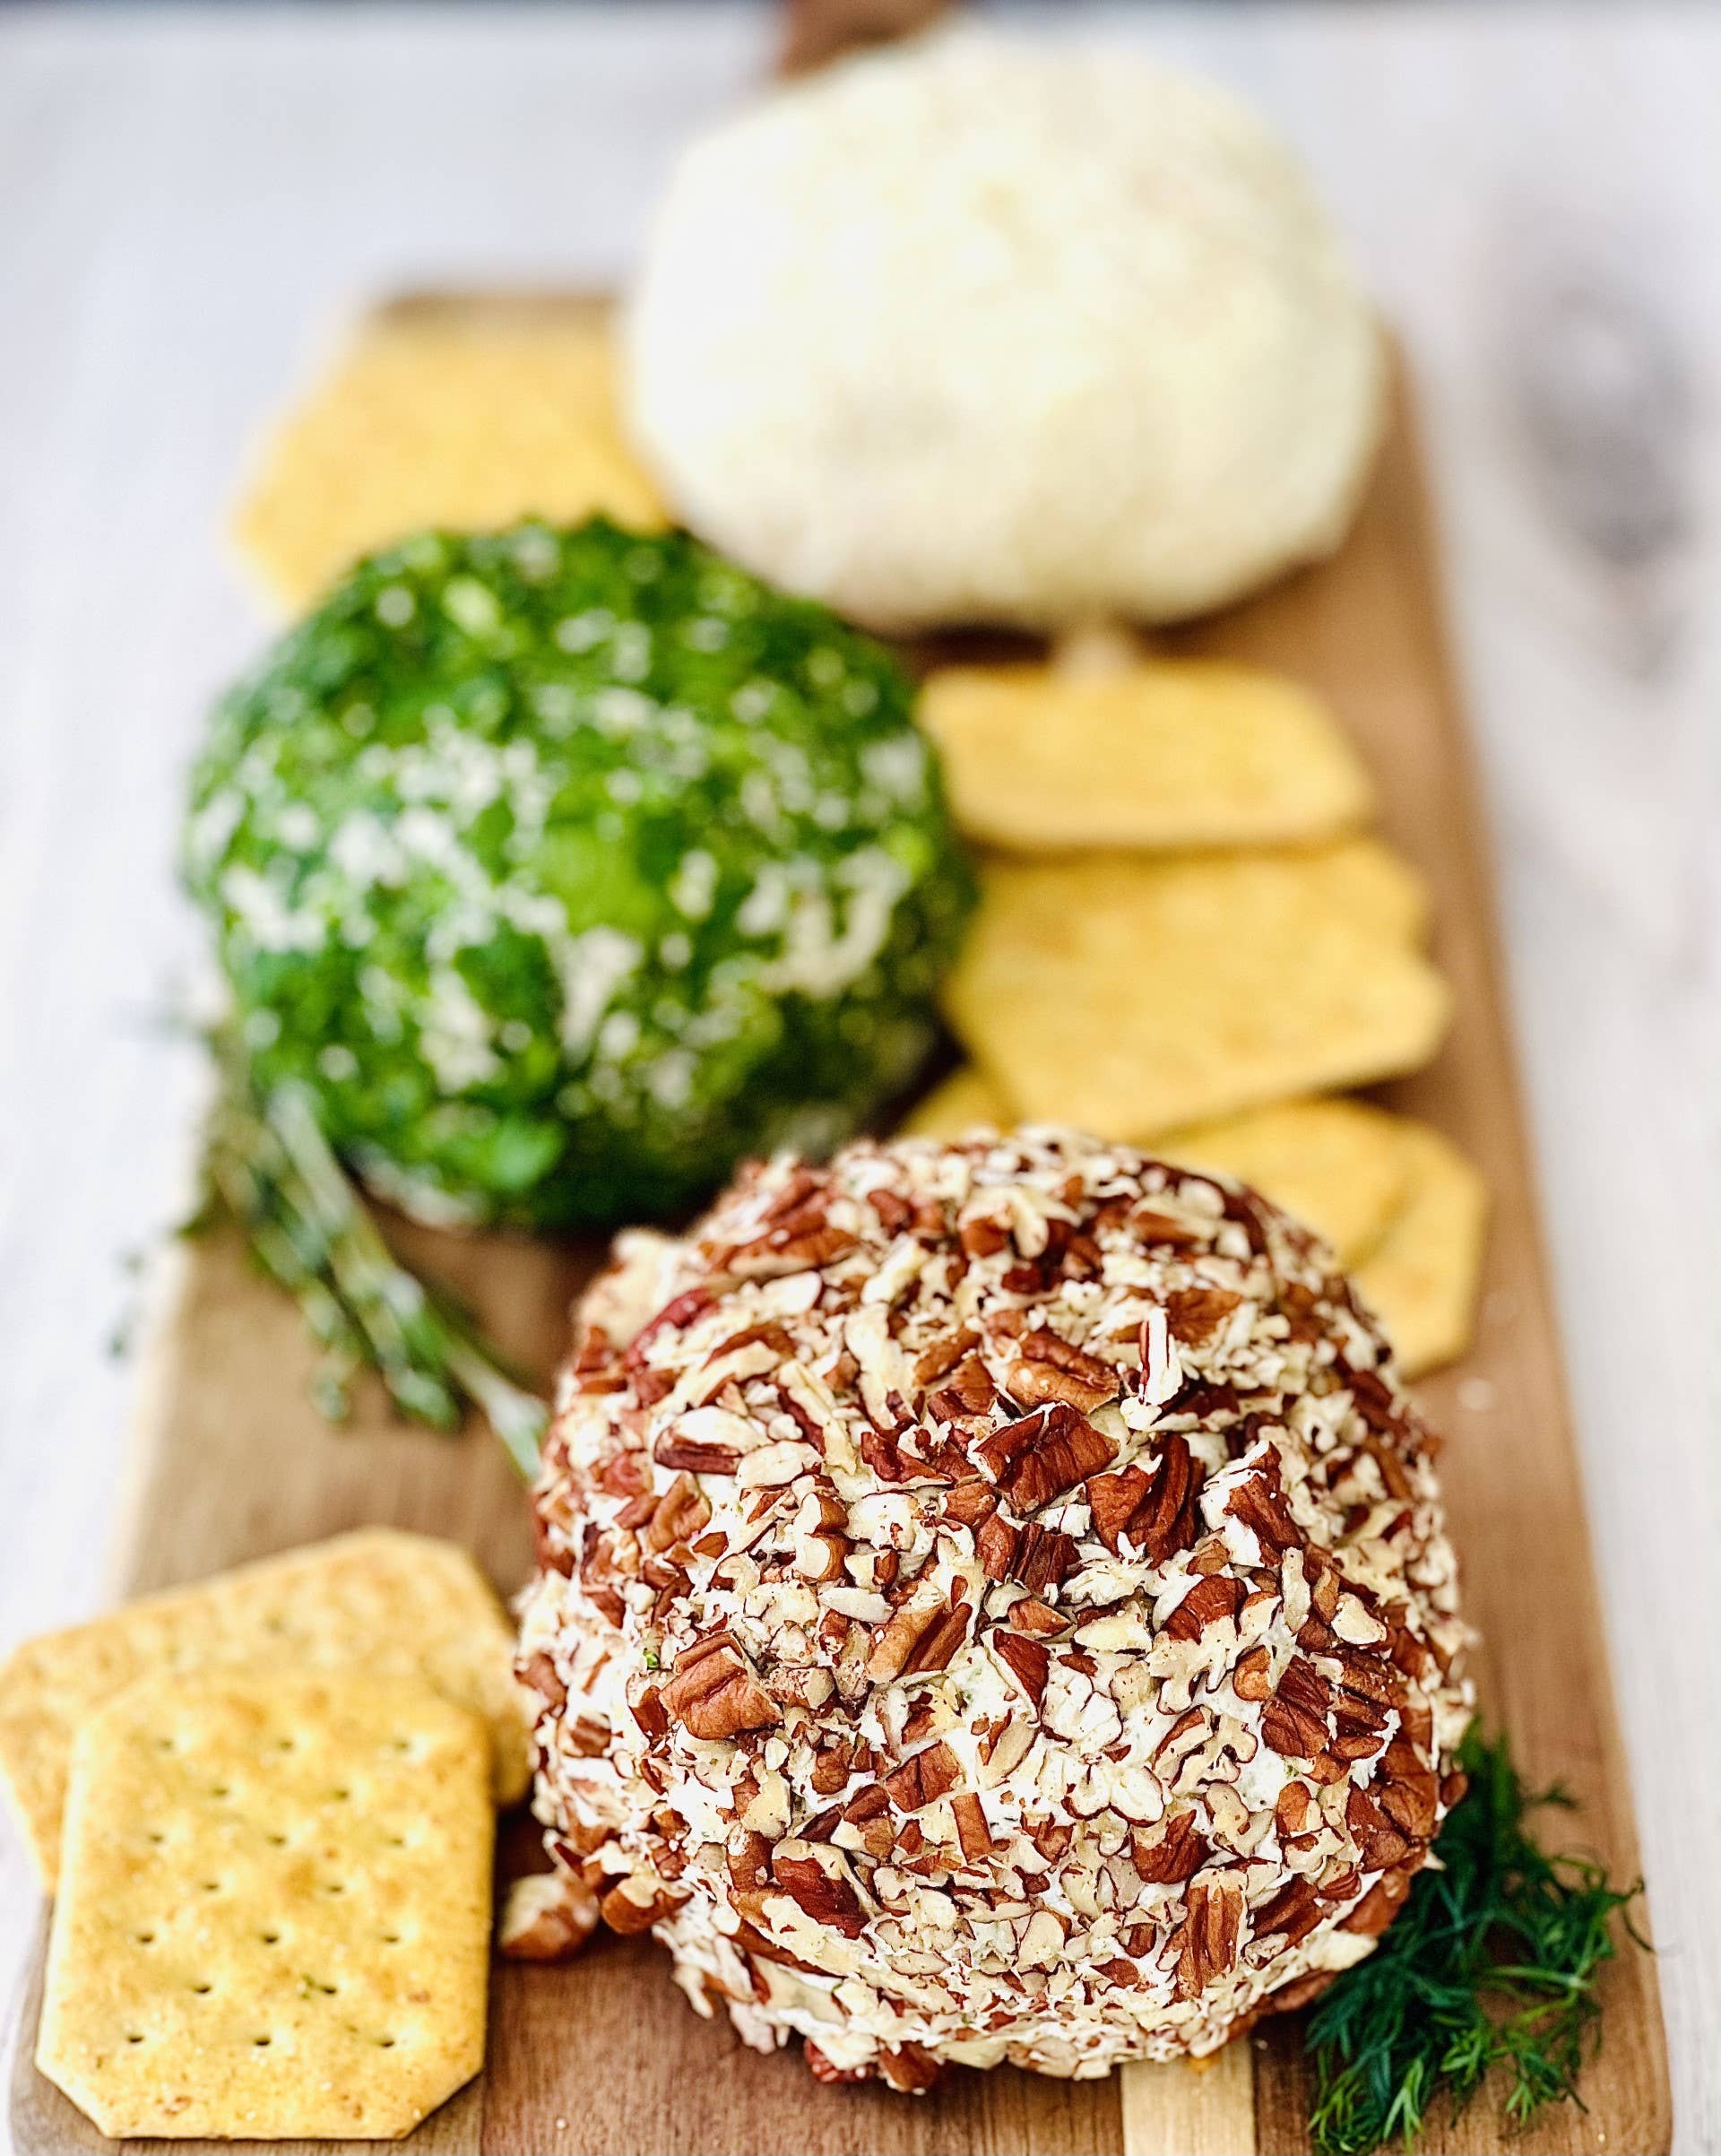 A festive holiday gift featuring the Mariachi Mexican Appetizer Cheeseball surrounded by an assortment of crackers and nuts, elegantly displayed on a rustic wooden board.